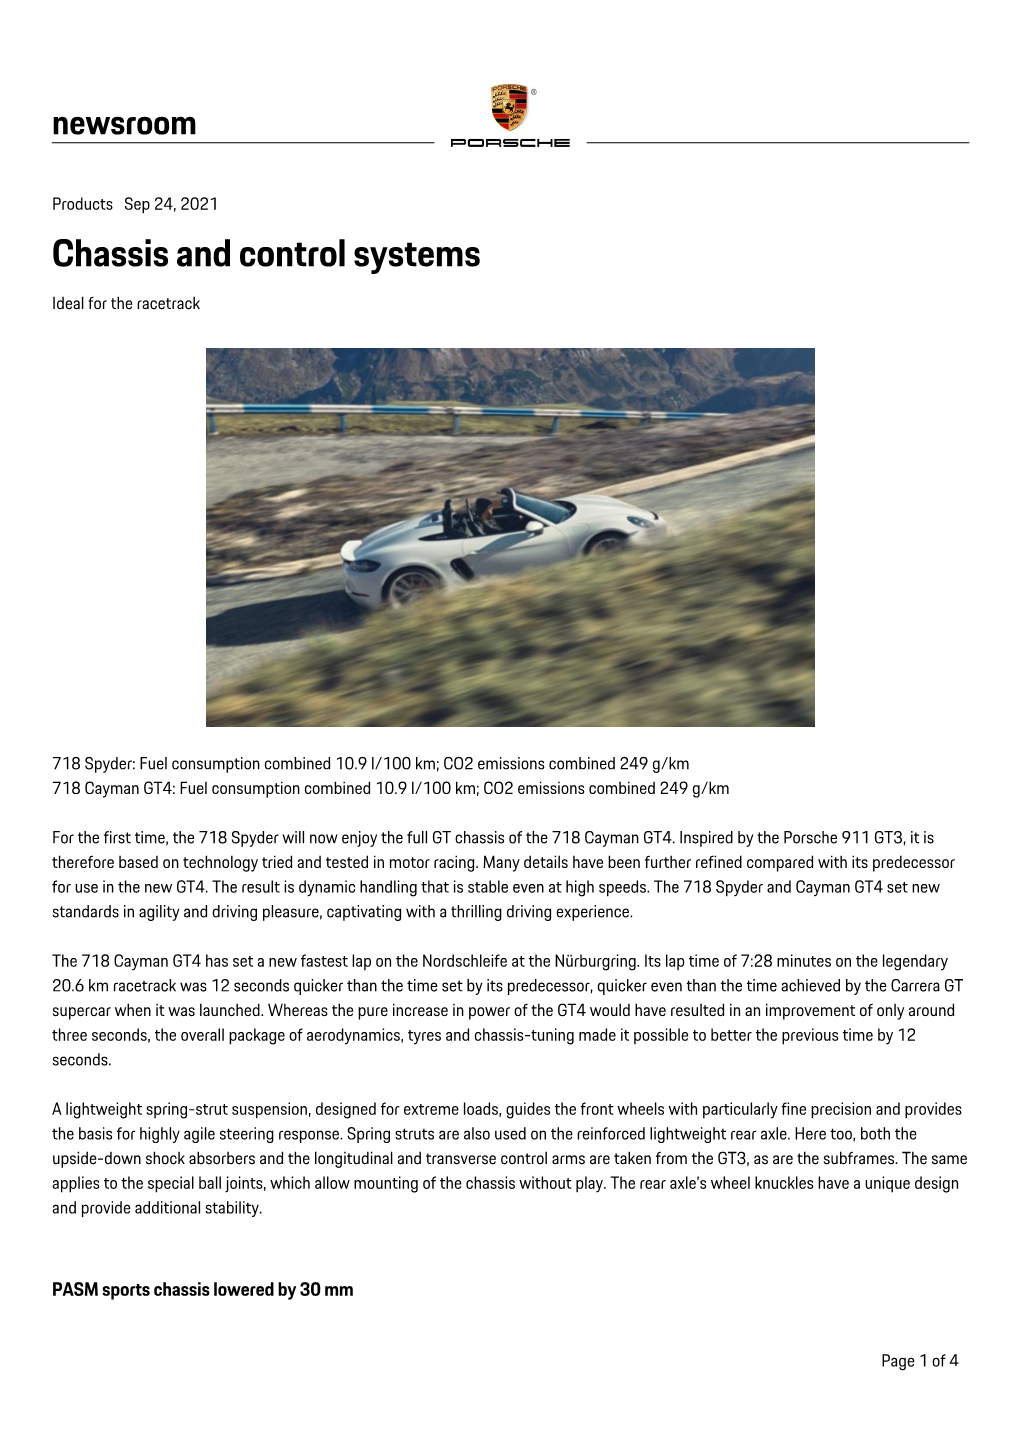 Chassis and Control Systems Ideal for the Racetrack